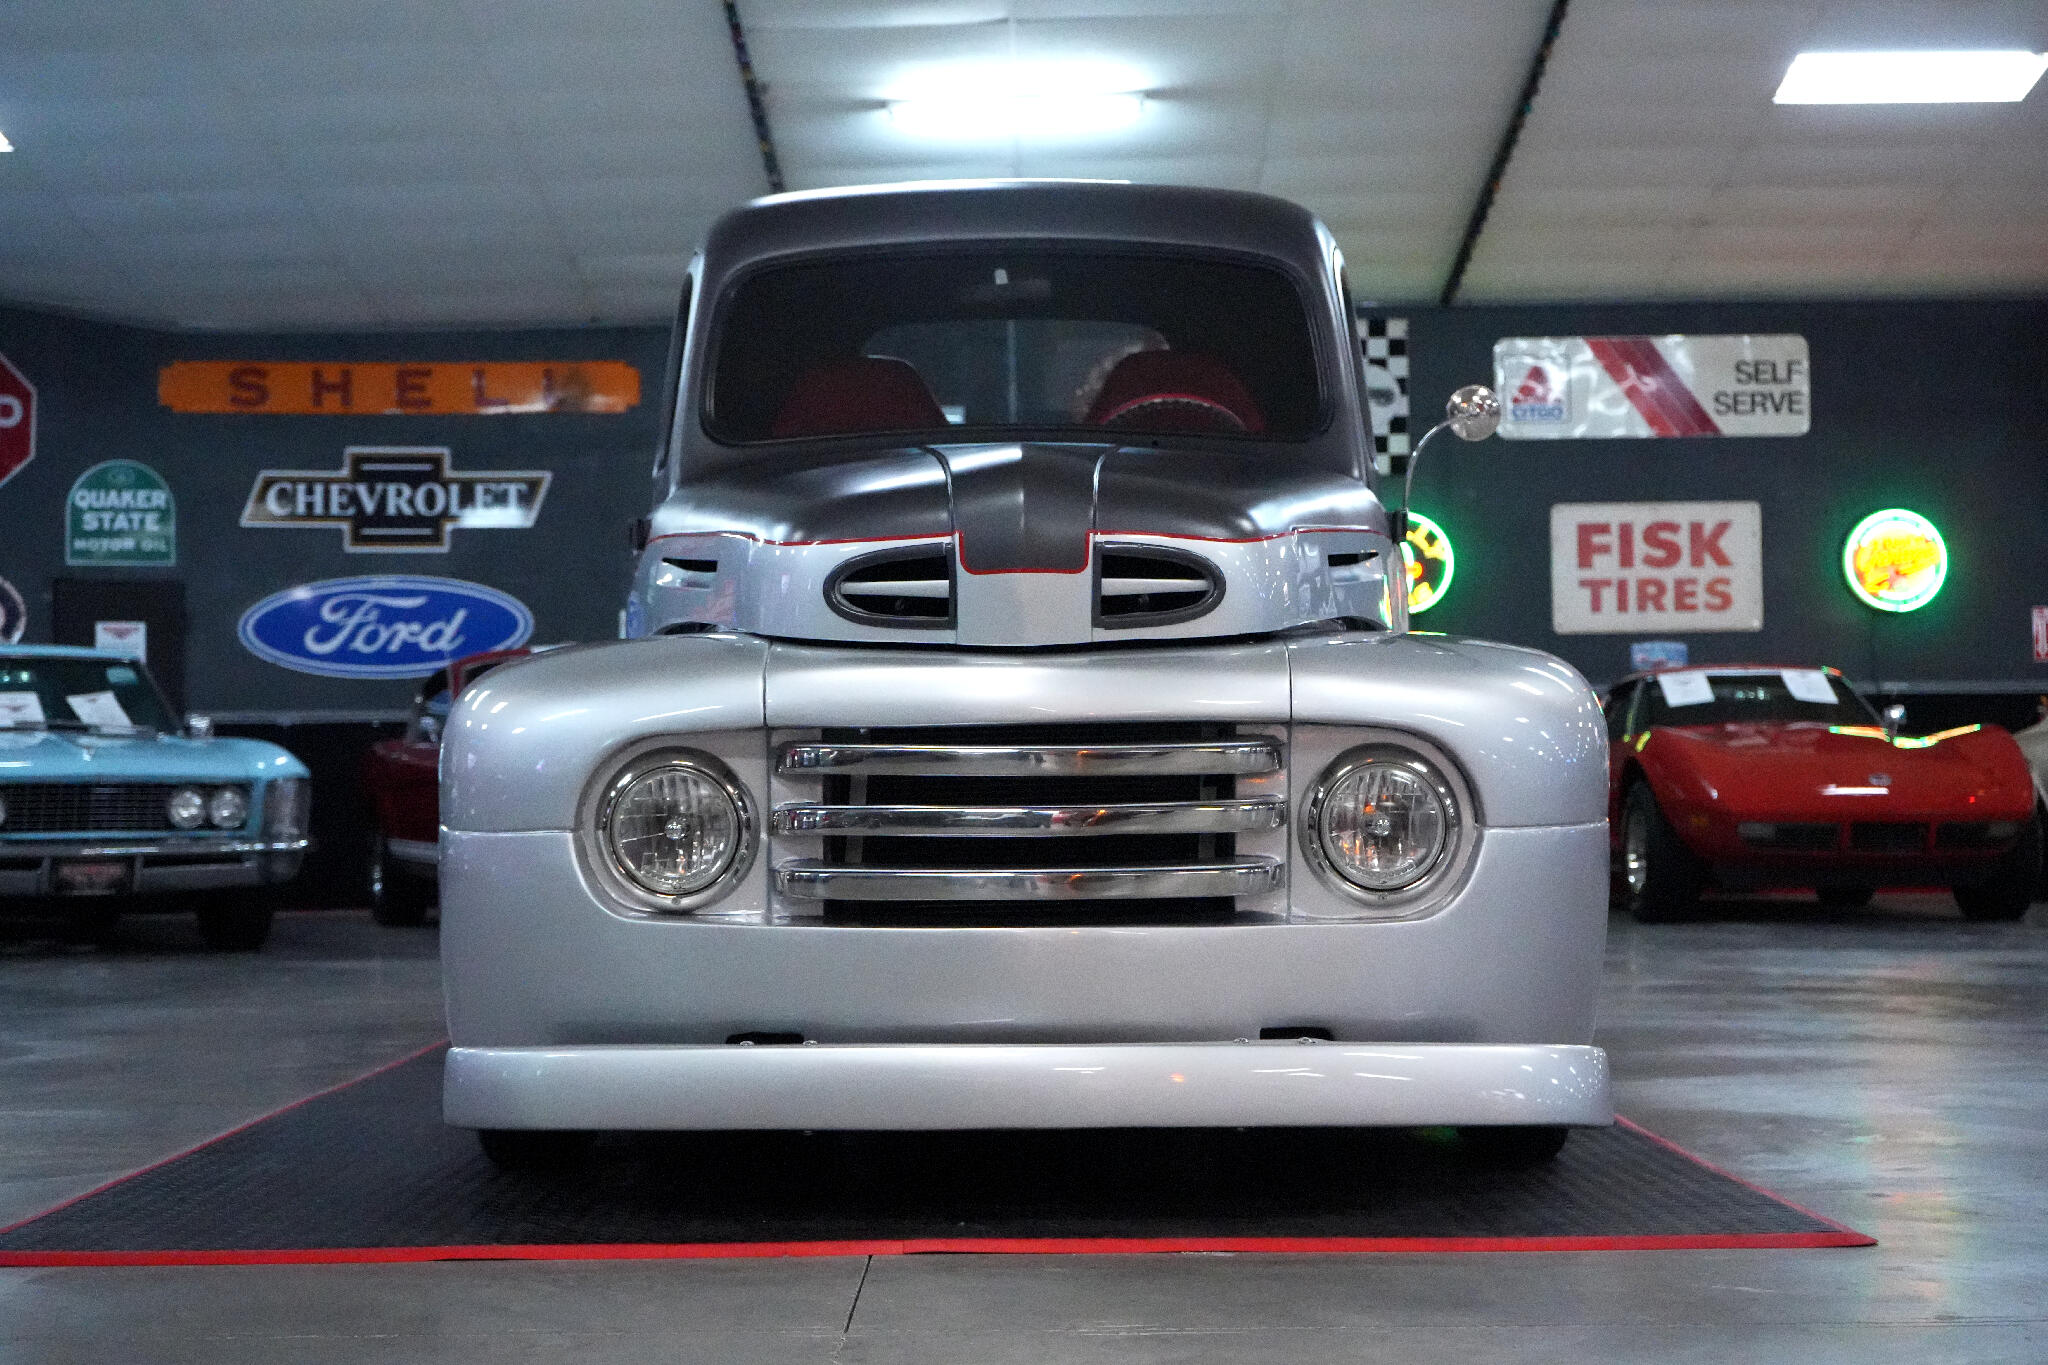 1949 Ford F-1 18